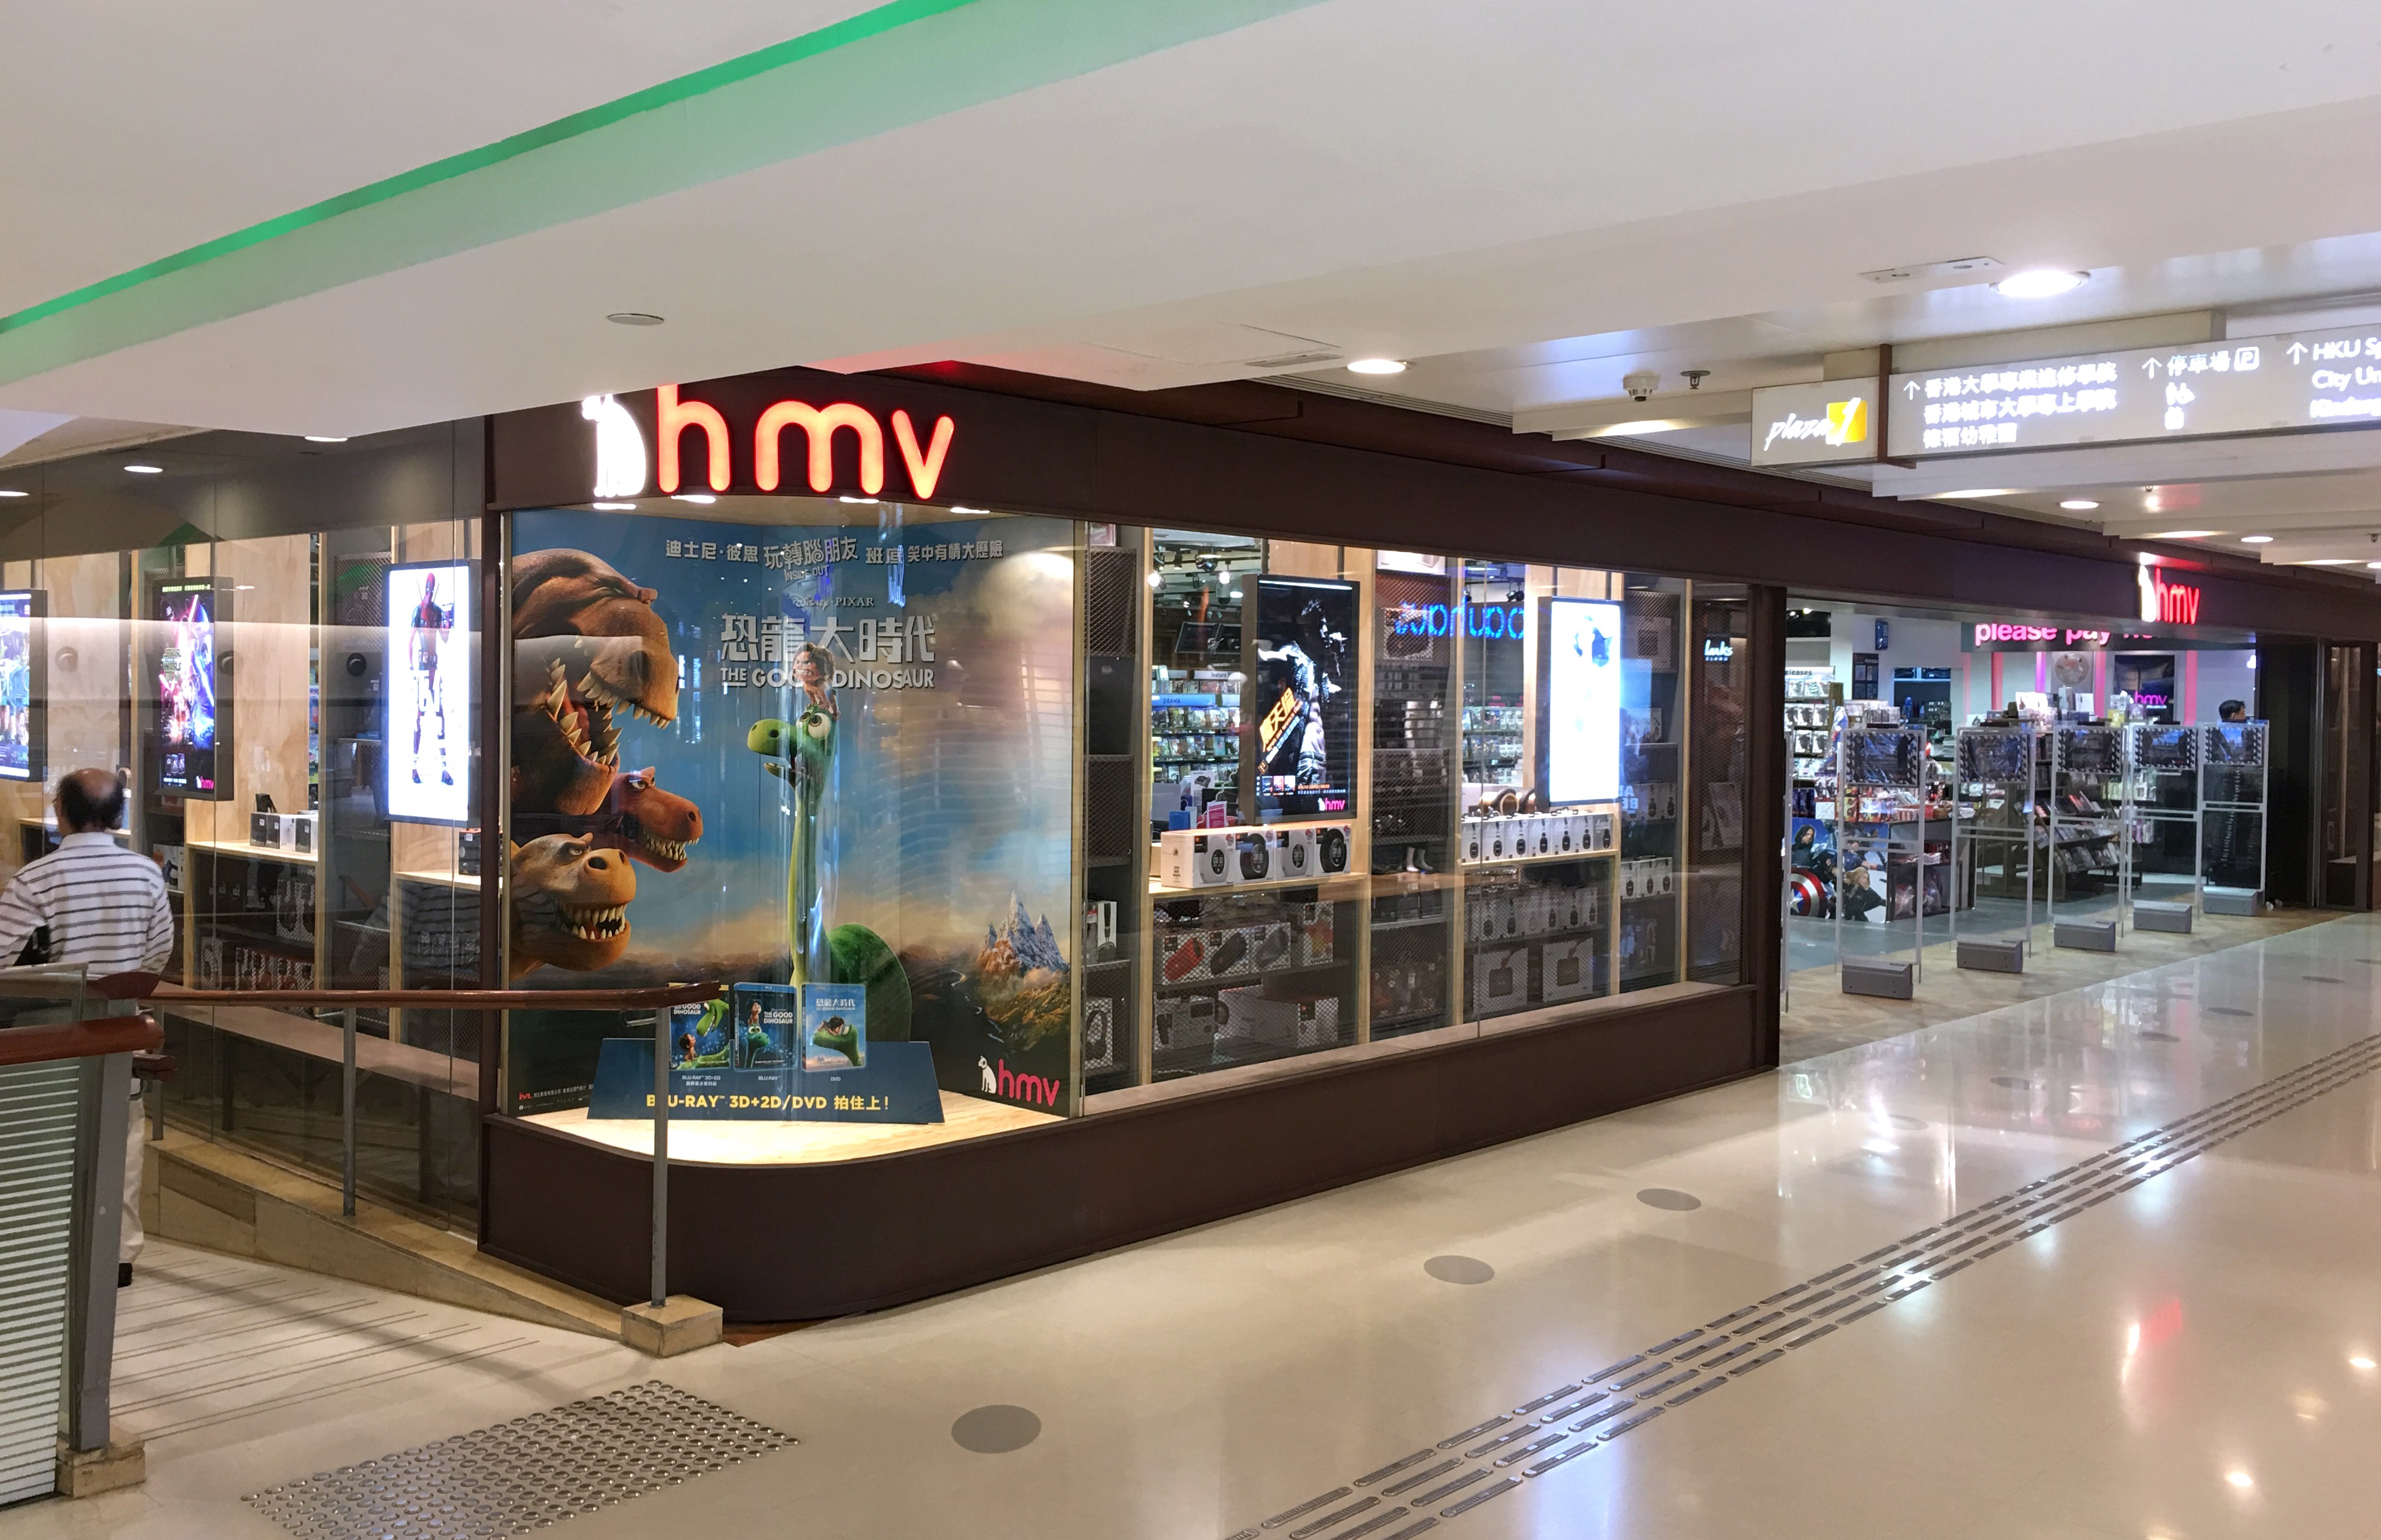 The HMV store at Telford Plaza in Kowloon Bay. Photo: Handout